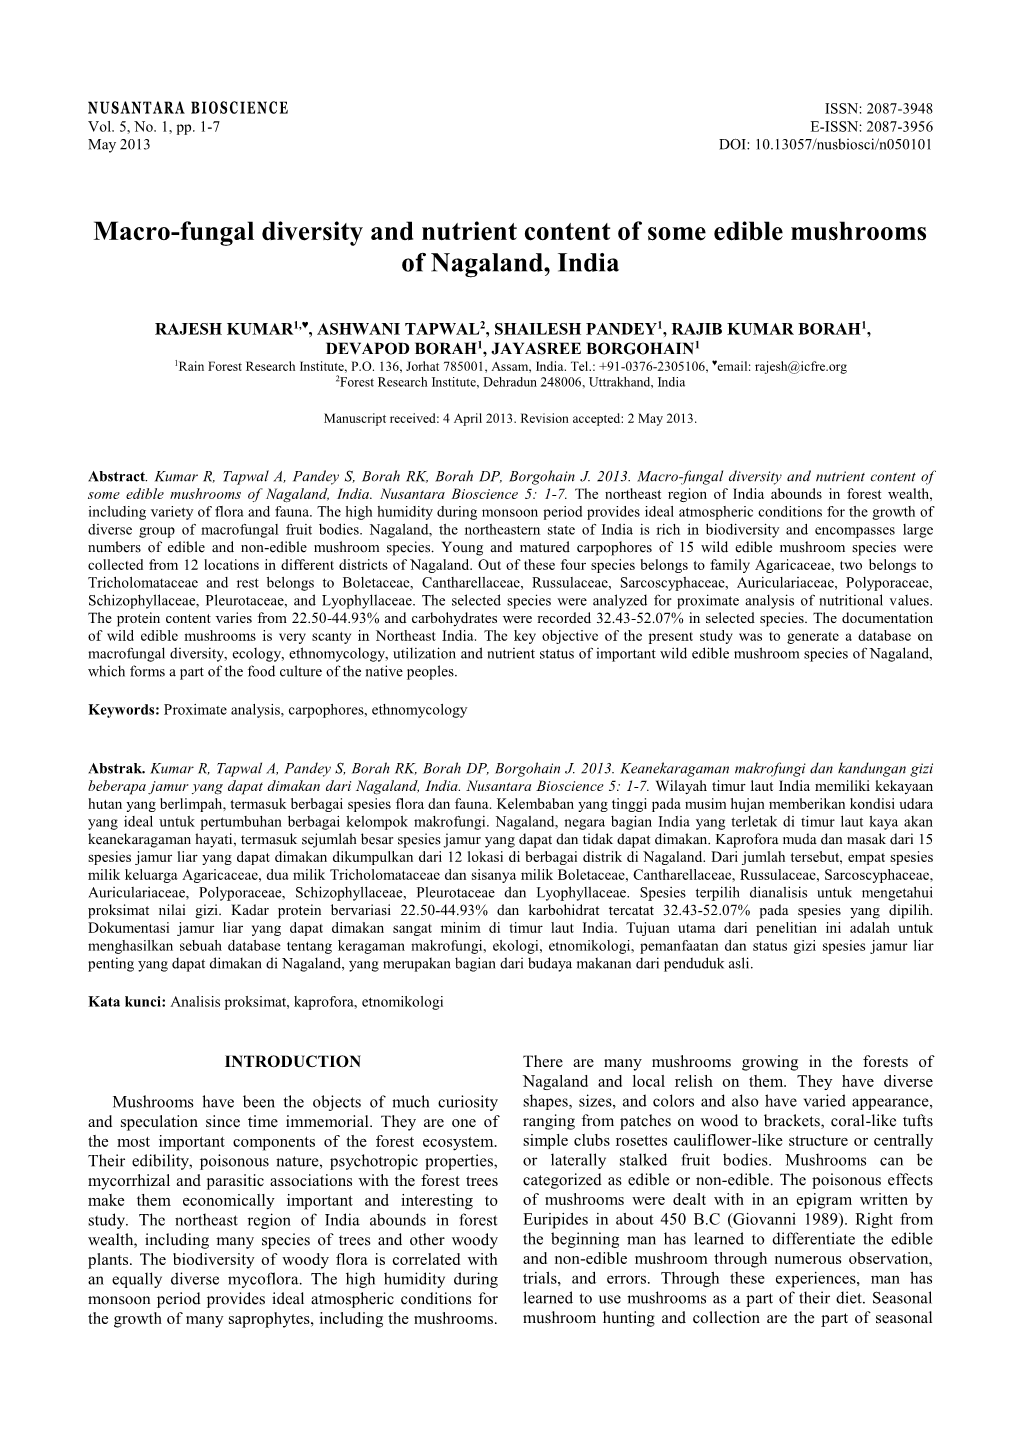 Macro-Fungal Diversity and Nutrient Content of Some Edible Mushrooms of Nagaland, India